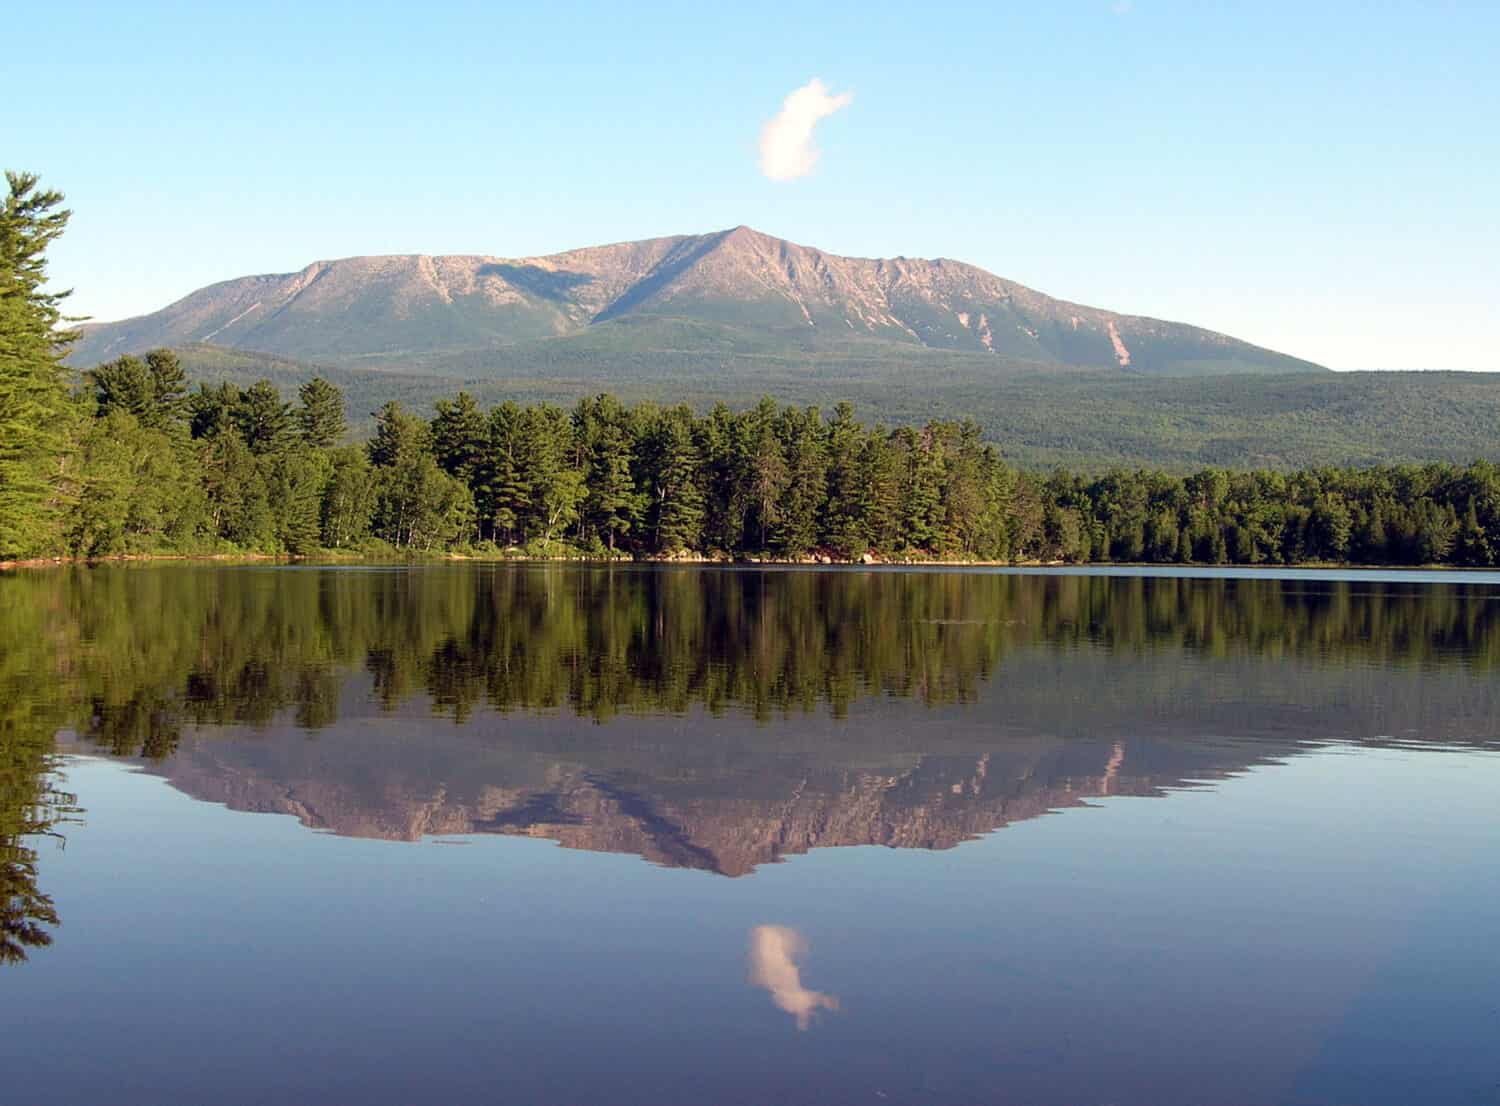 Mt Katahdin Baxter State Park Millinocket Maine end of Appalachian Trail. One of the most incredible caves, Debsconeag Ice Cave is found nearby.